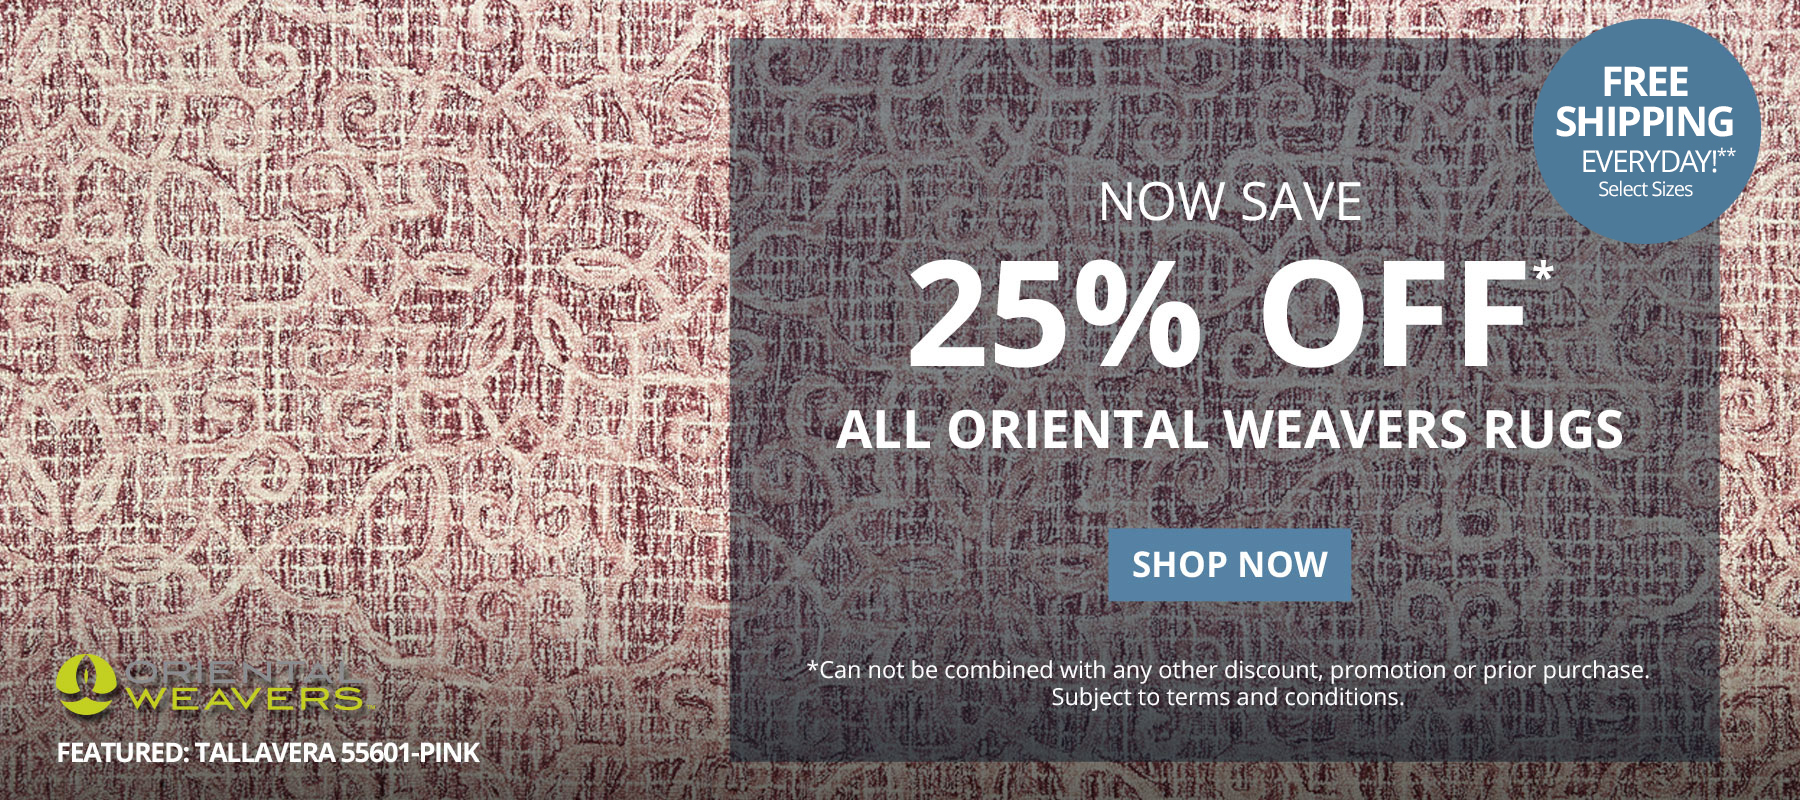 Now Save 25% Off* All Oriental Weavers Rugs. Free Shipping Everyday!** Select Sizes. *Can not be combined with any other discount, promotion or prior purchase. Subject to terms and conditions. Shop Now.